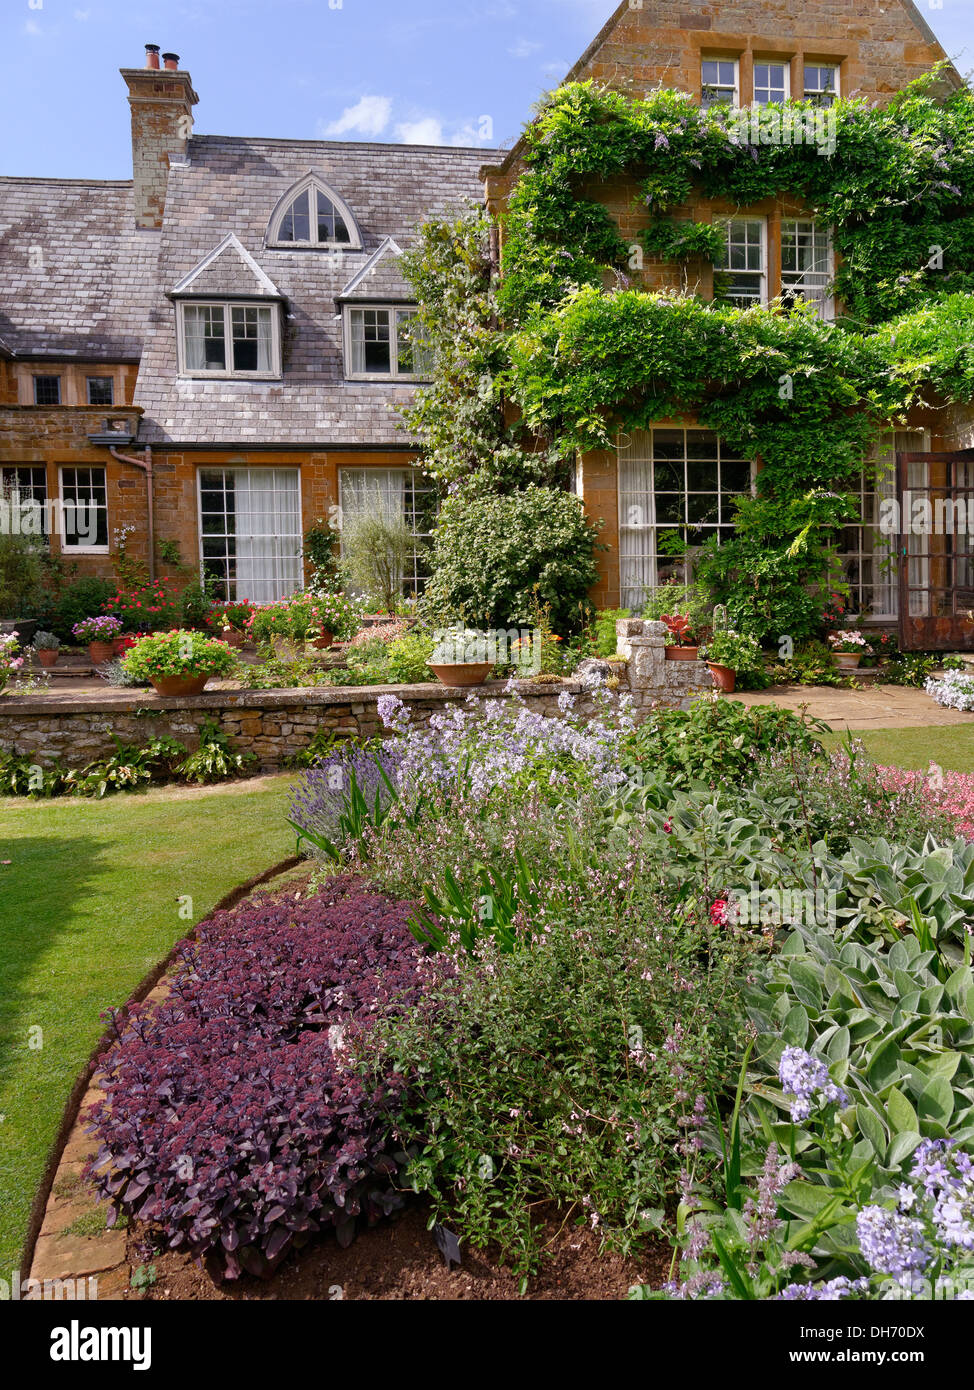 Flower beds in gardens of Coton Manor House, Coton, Northamptonshire, UK. Stock Photo